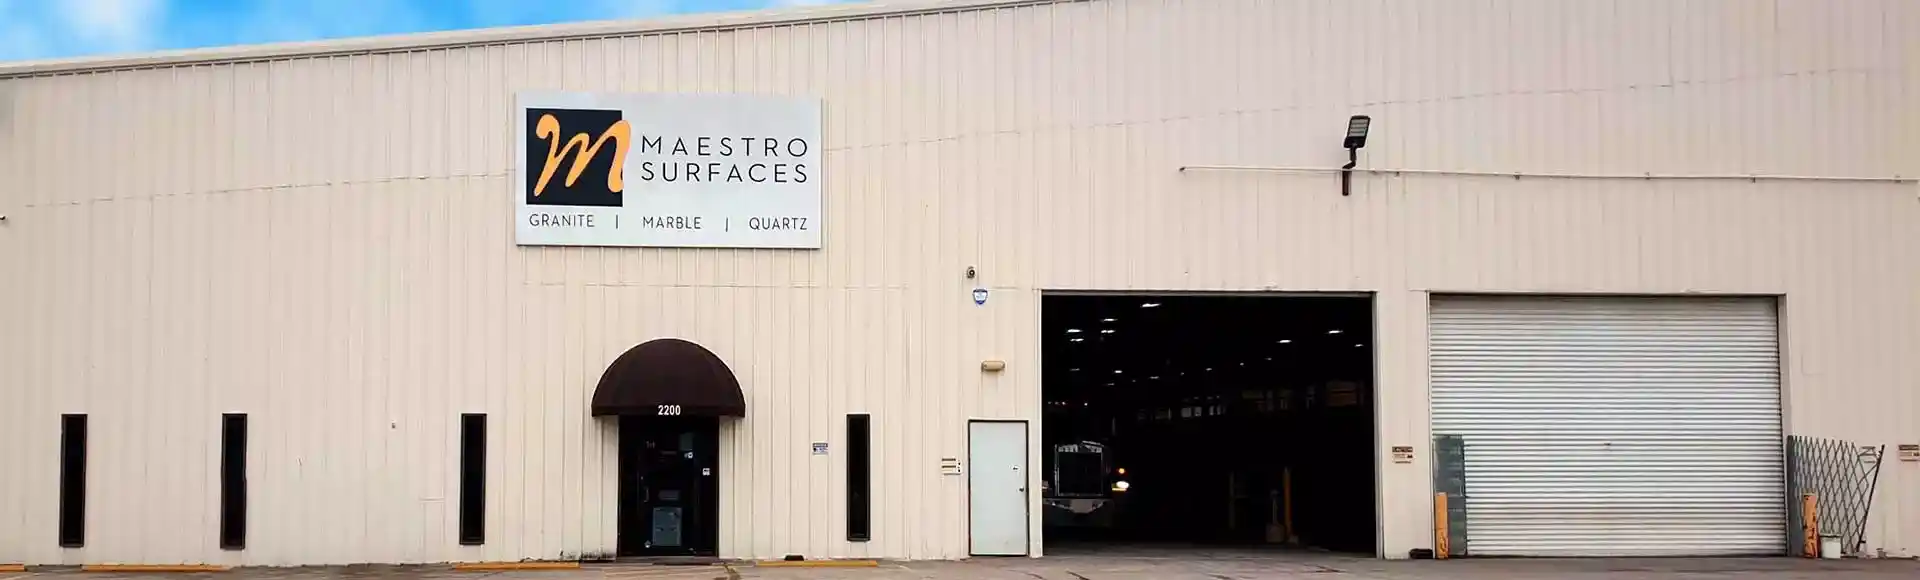 Maestro-Surfaces-Offices-Building-Location